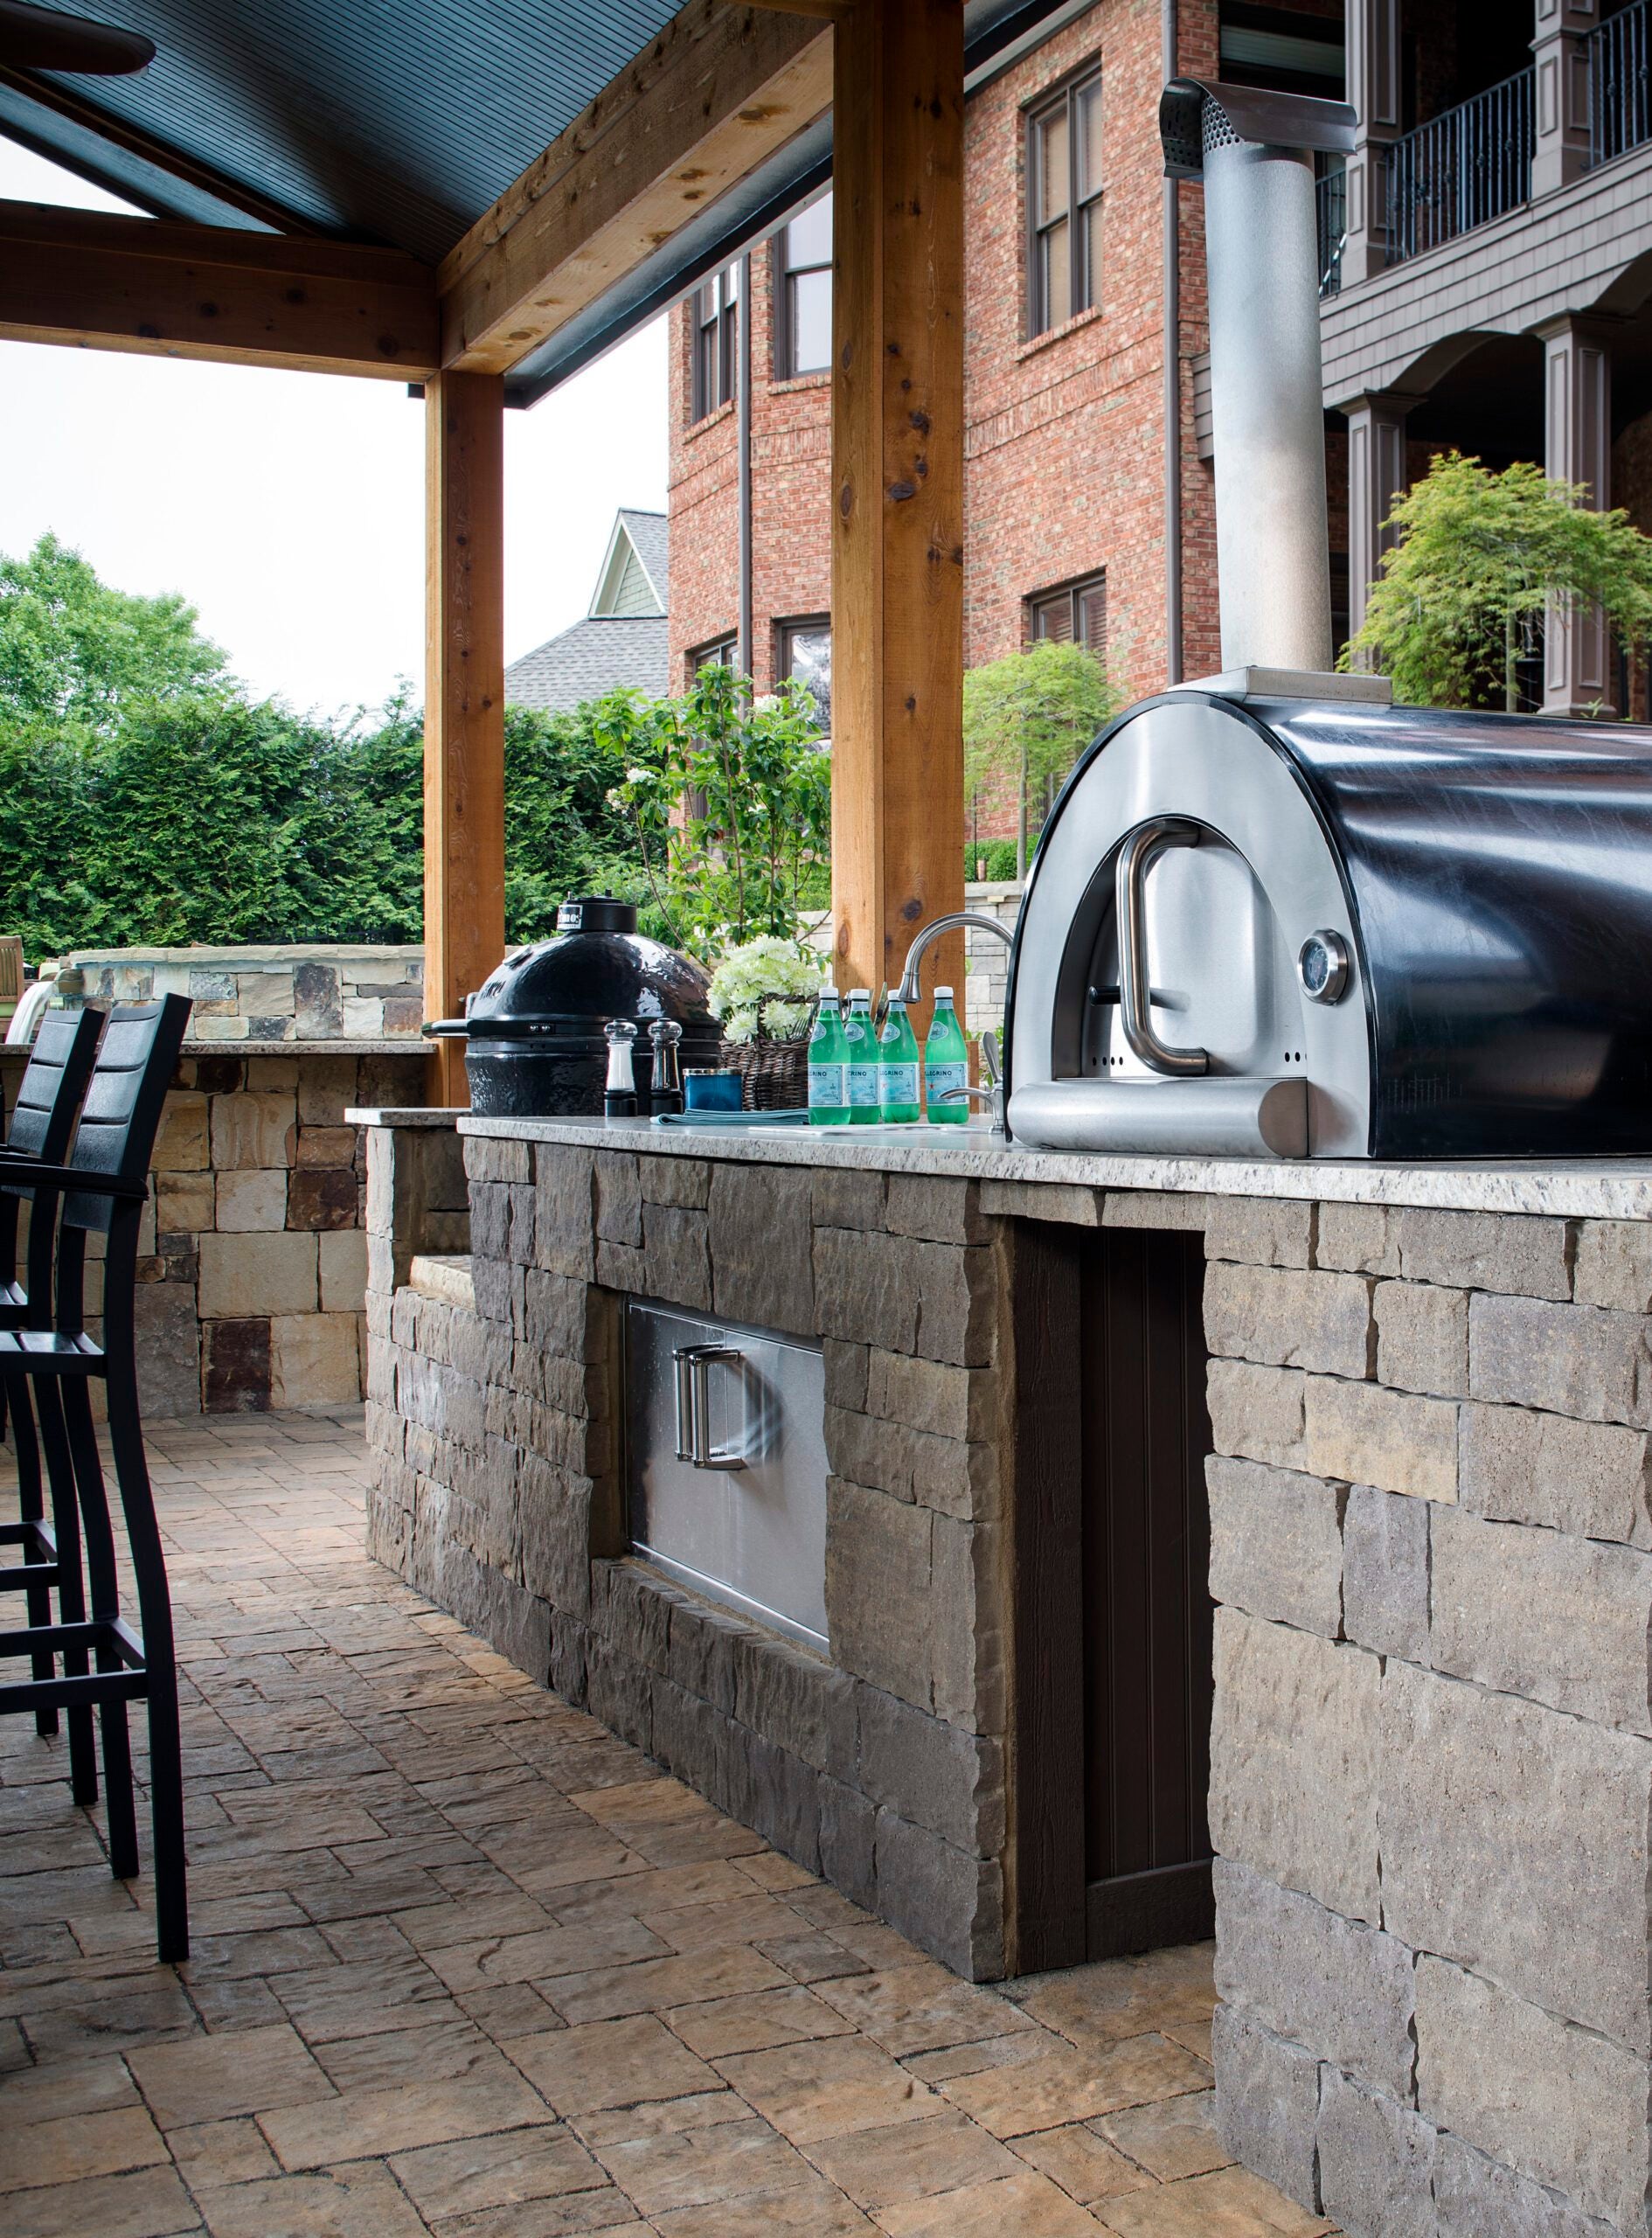 terrace designs add form and function. outdoor kitchen with multiple cooking options